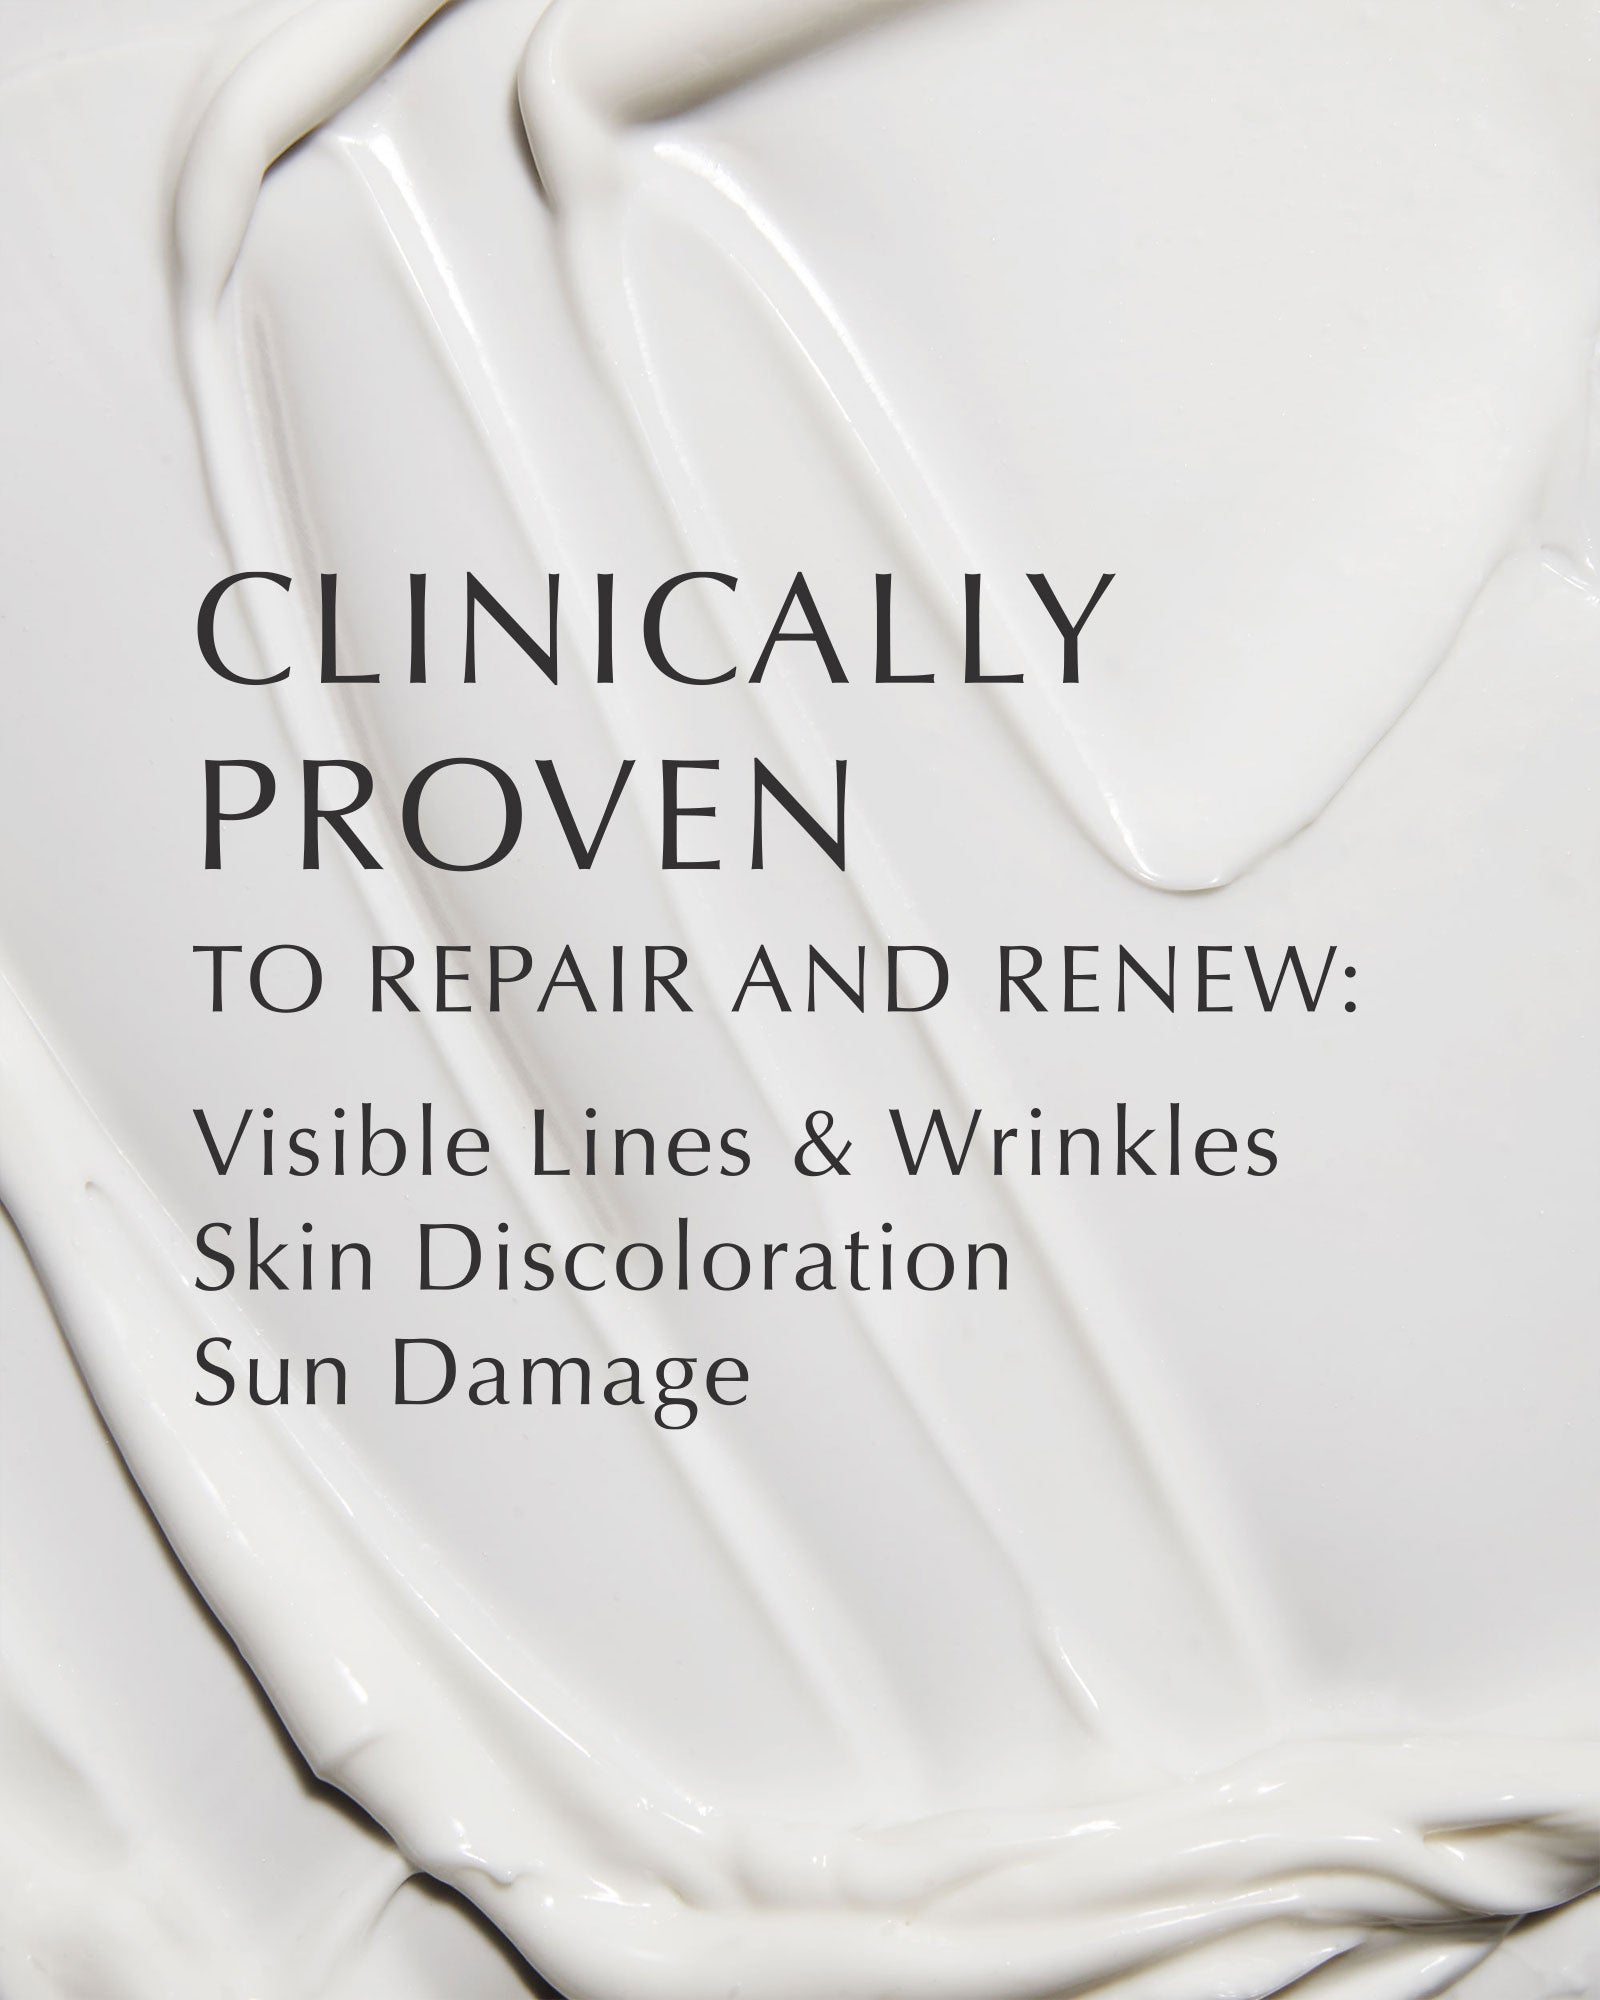 White image with black text overlay that says &quot;Clinically Proven to Repair and Renew: Visible Lines &amp; Wrinkles, Skin Discoloration, Sun Damage.&quot; Background image is a texture close-up of a white lotion.